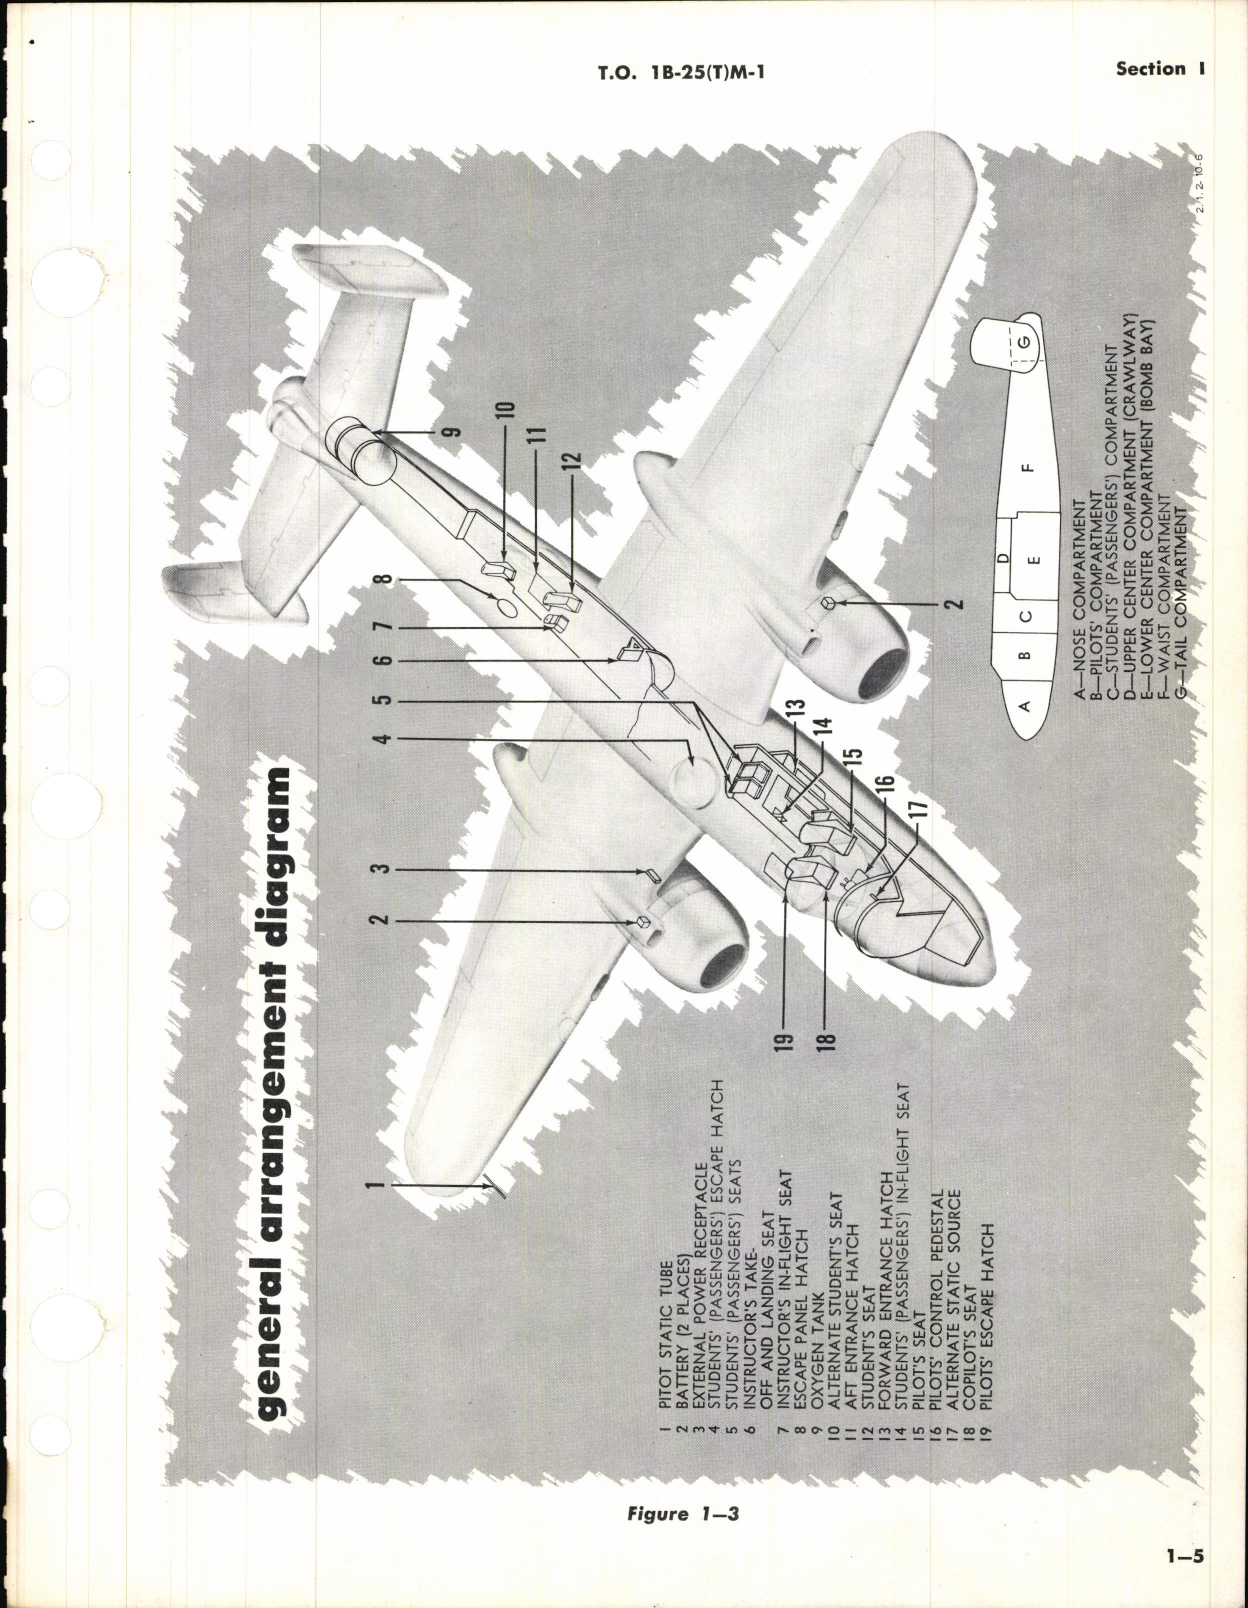 Sample page 11 from AirCorps Library document: Flight Handbook for USAF Series TB-25M Aircraft